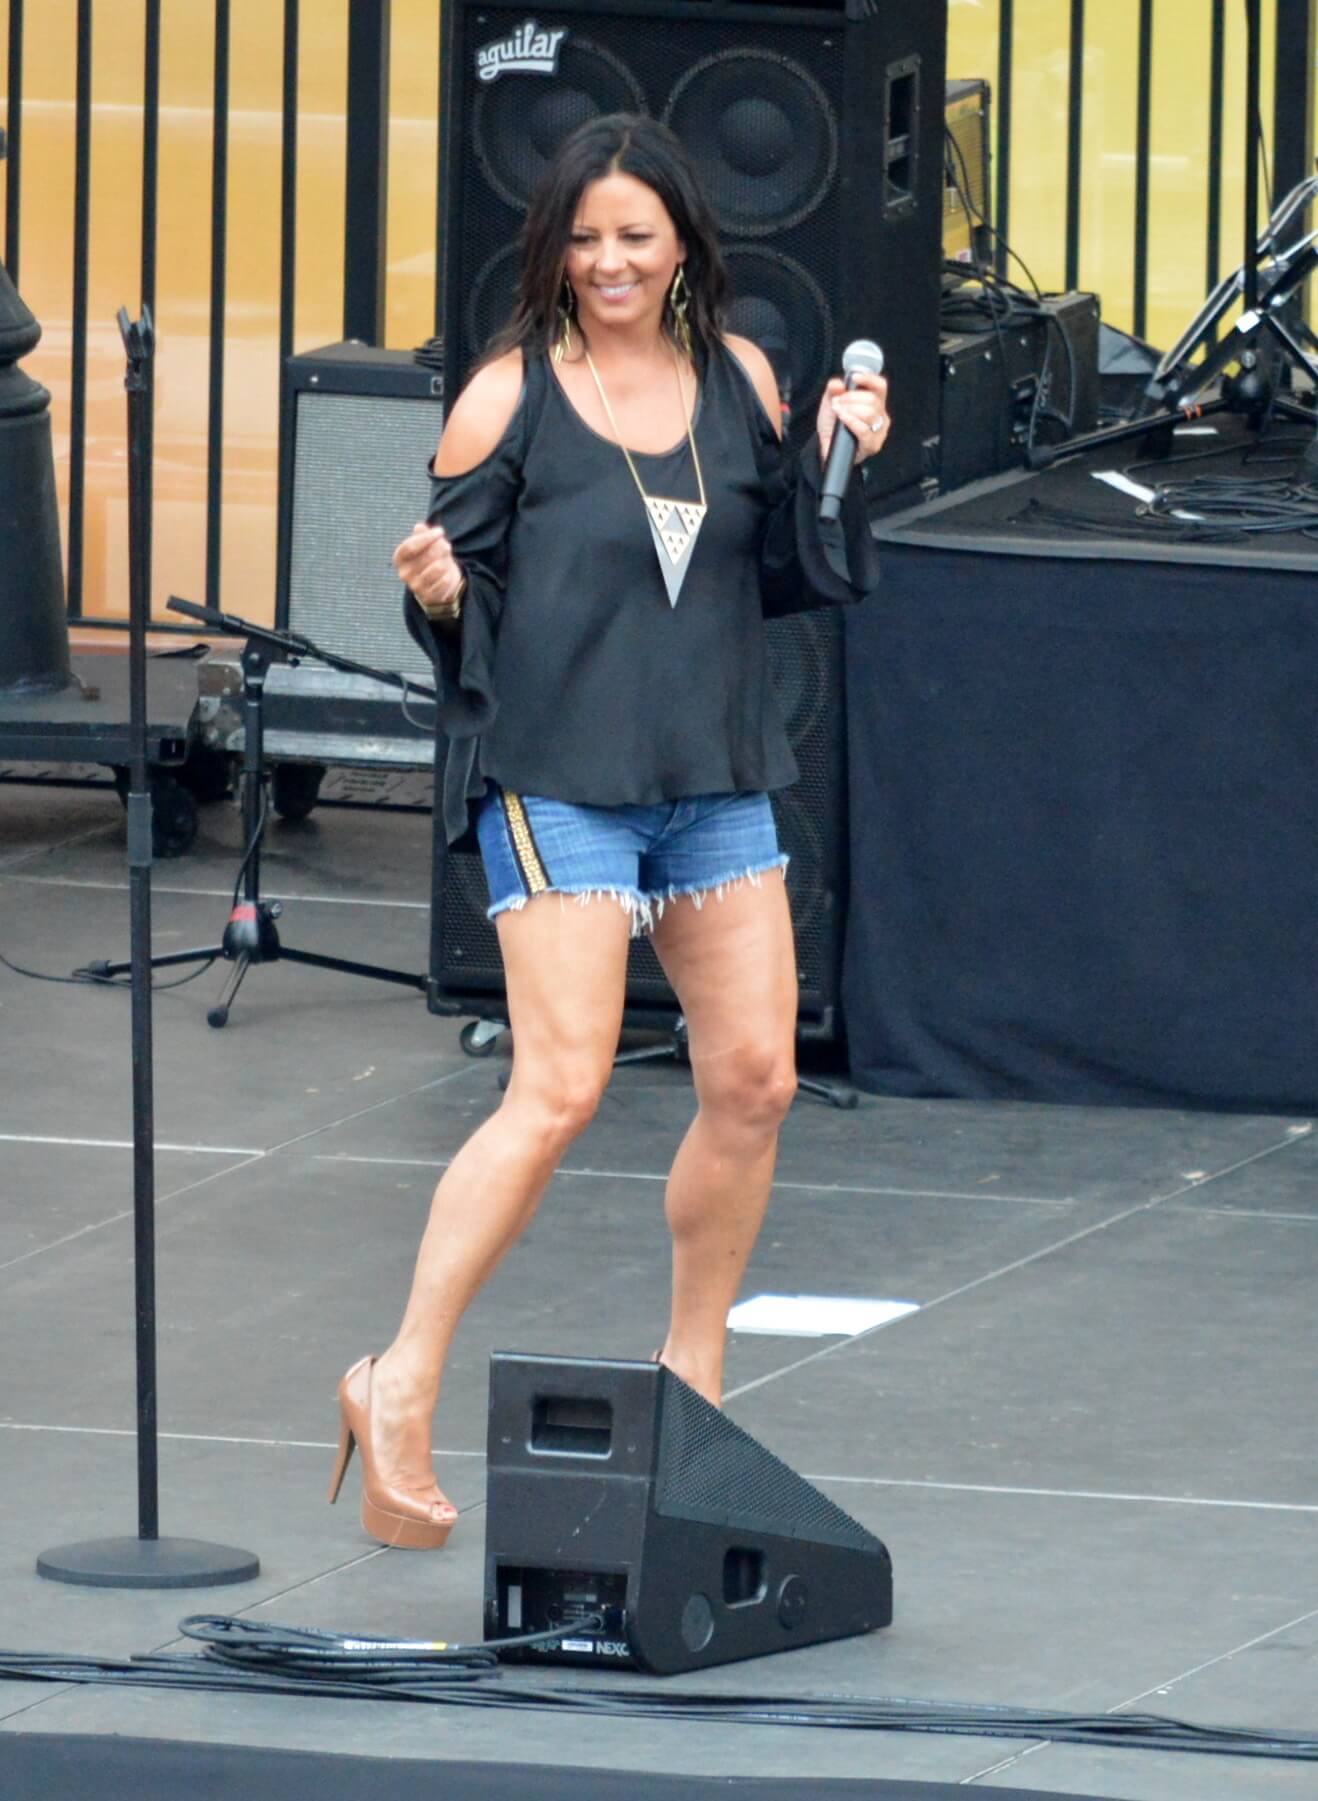 65+ Hot Pictures Of Sara Evans Which Which Will Make You Drool For | Best Of Comic Books